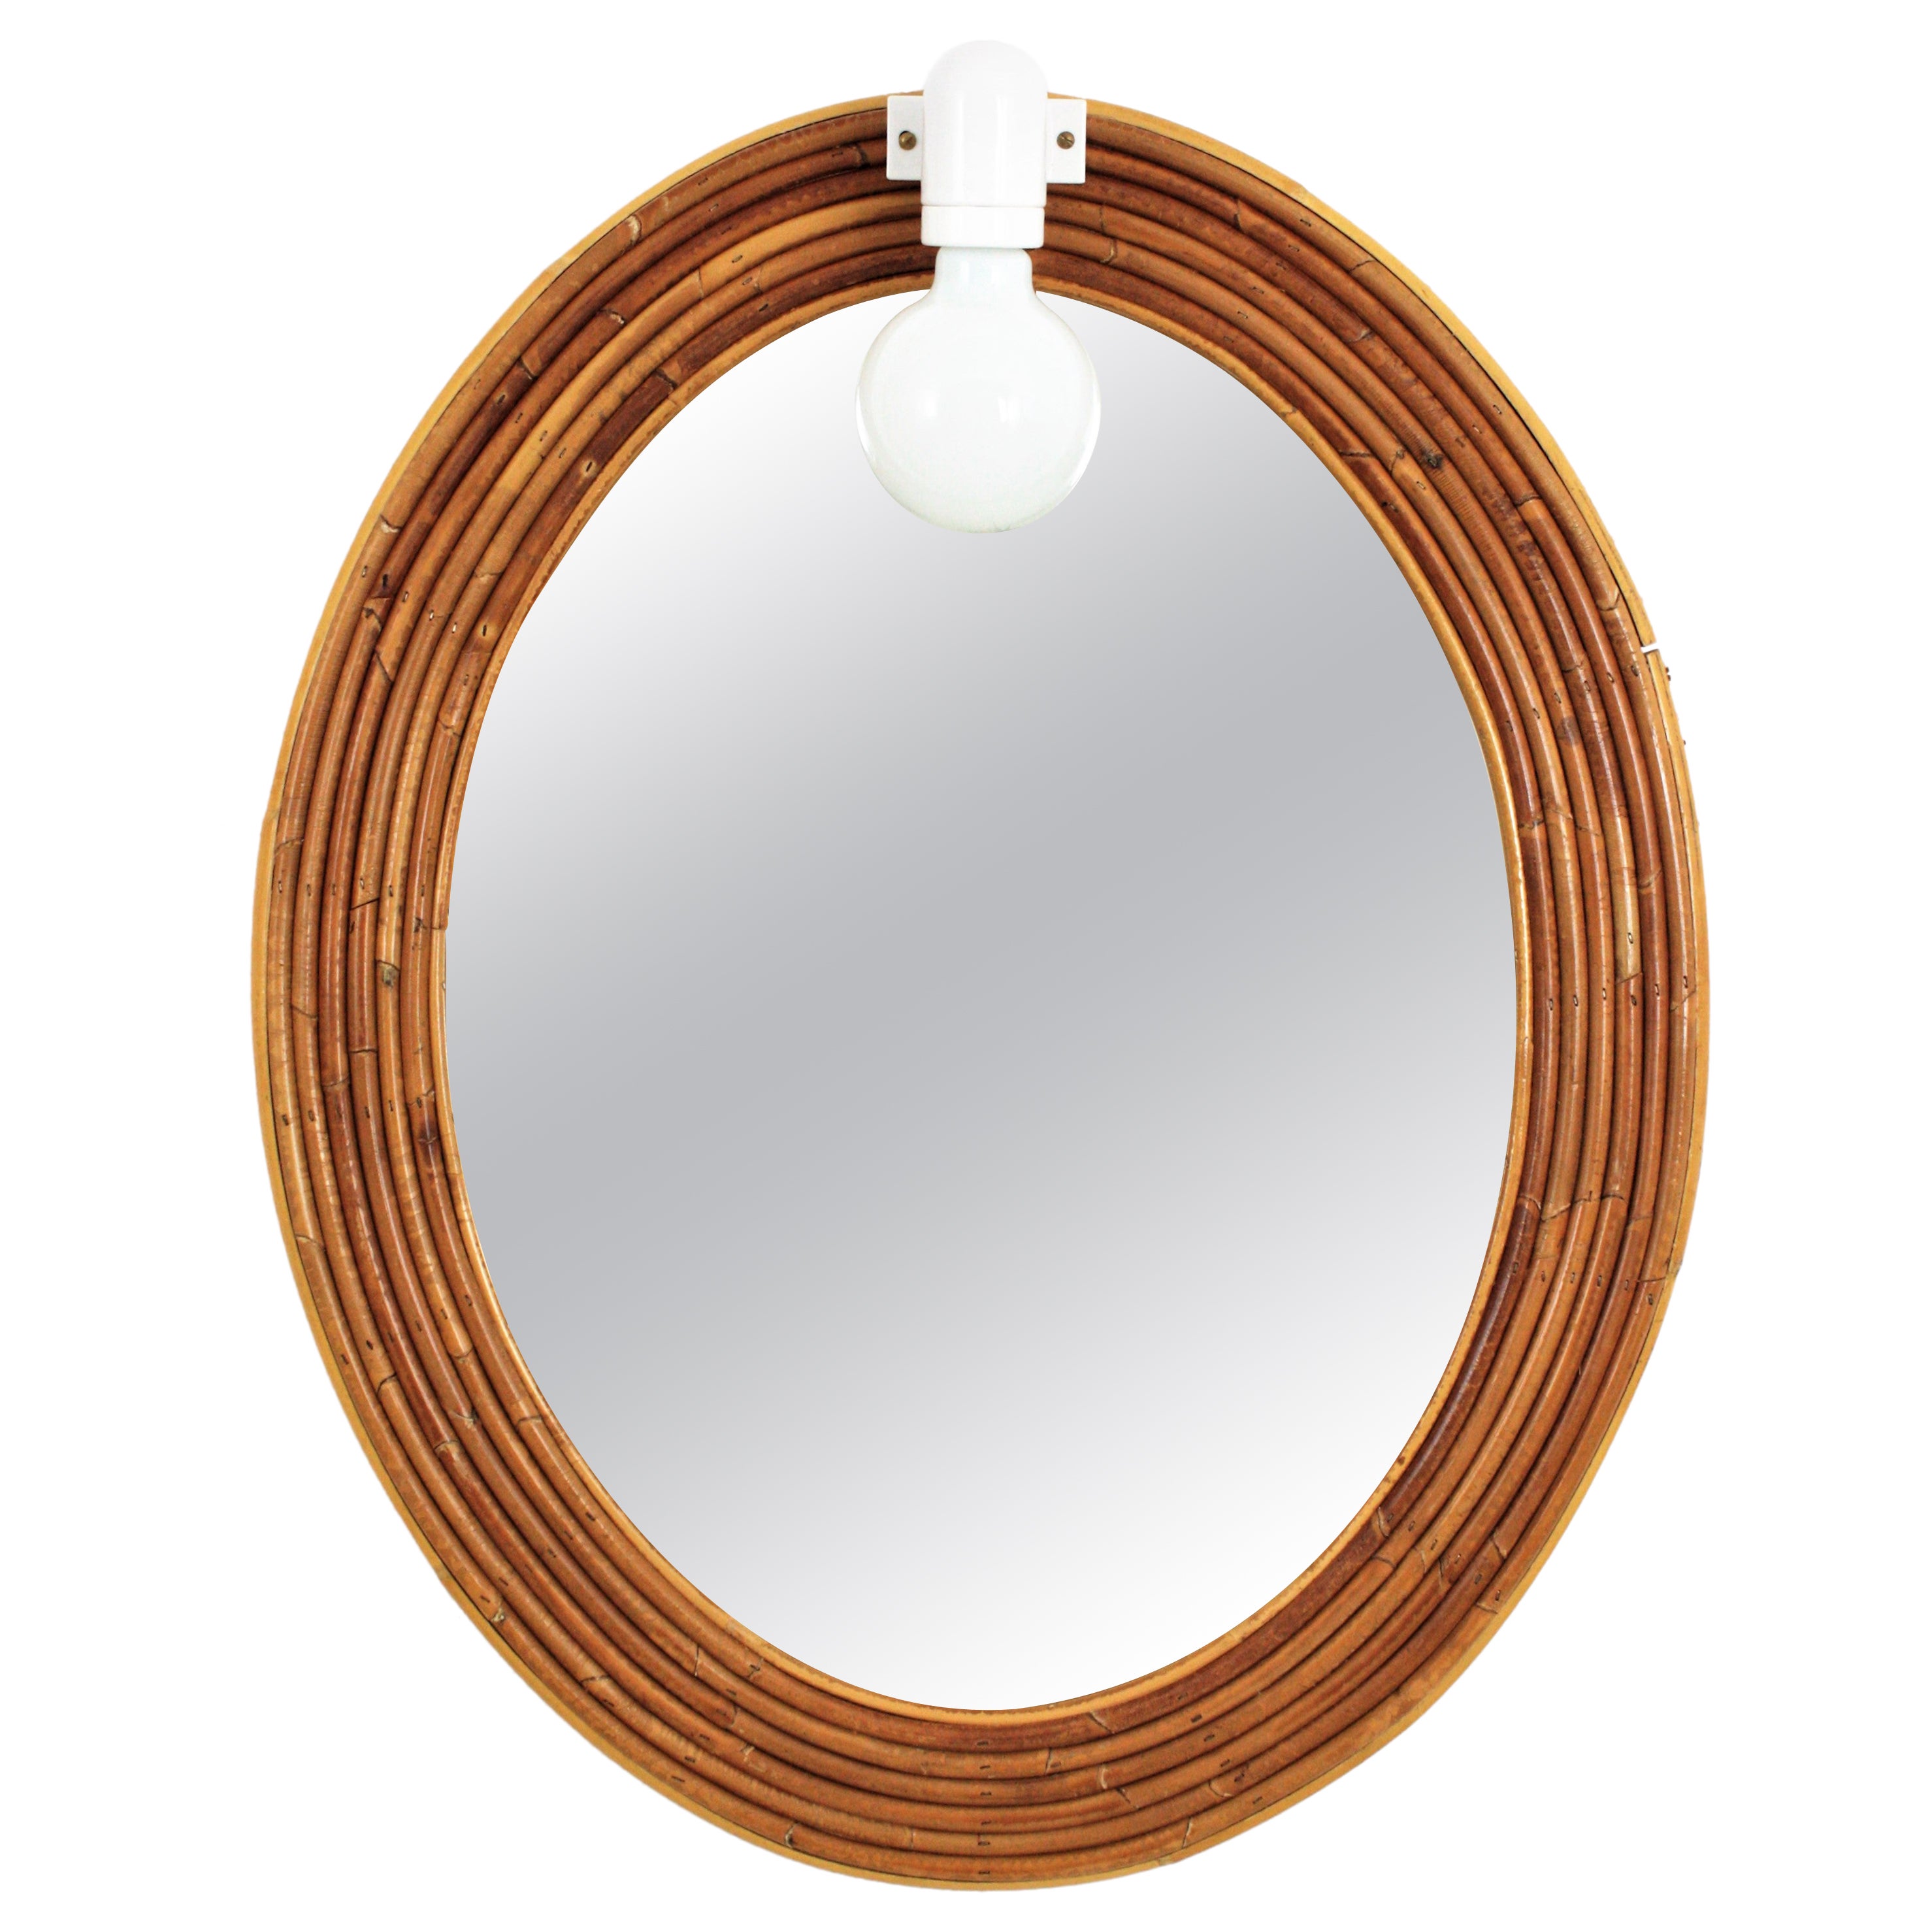 Vivai del Sud Rattan Oval Mirror with Wall Light